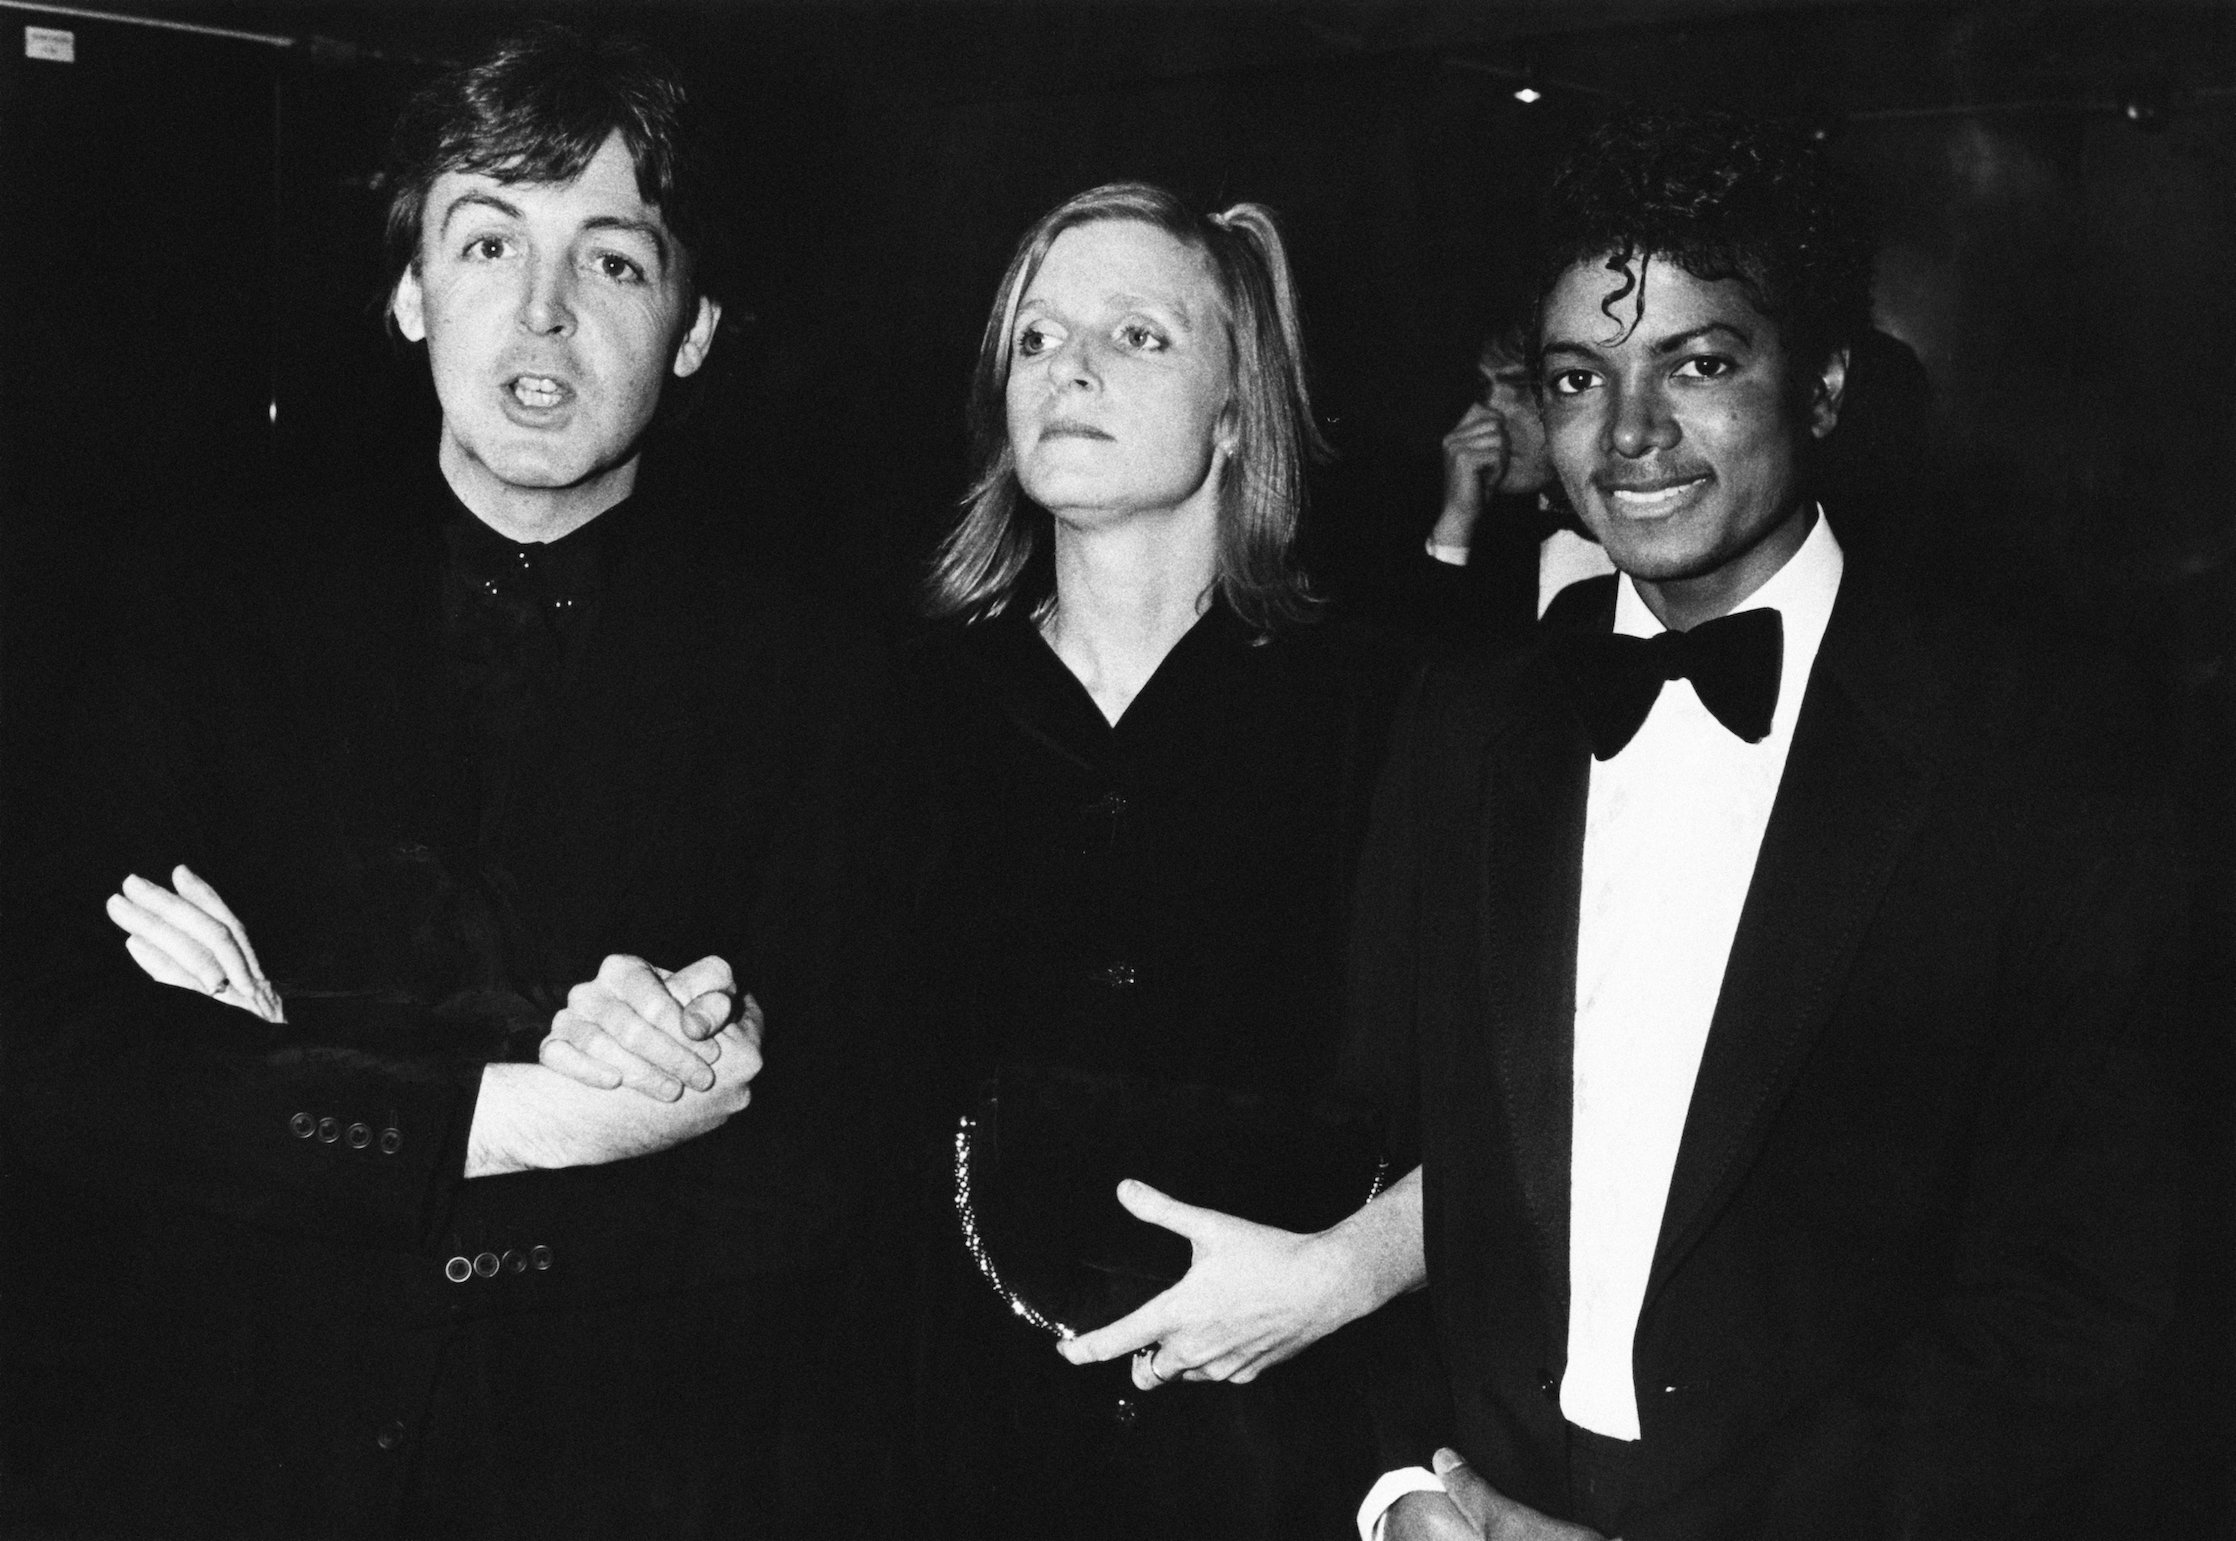 Paul McCartney, Linda McCartney, and Michael Jackson attend the BRIT Awards in London, England, in 1983